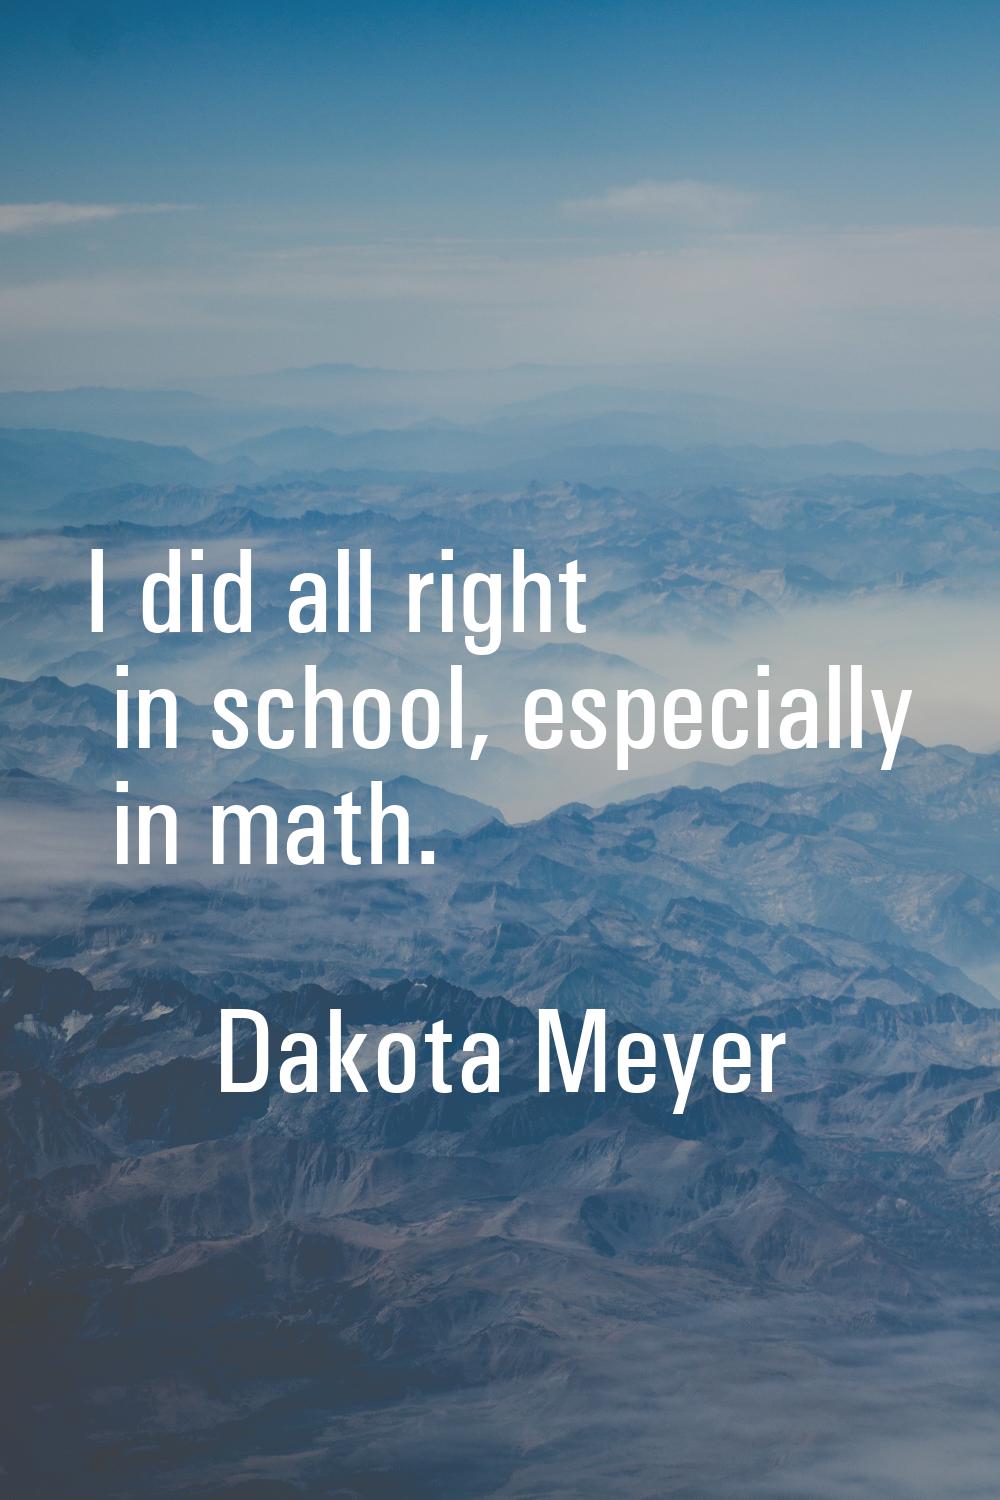 I did all right in school, especially in math.